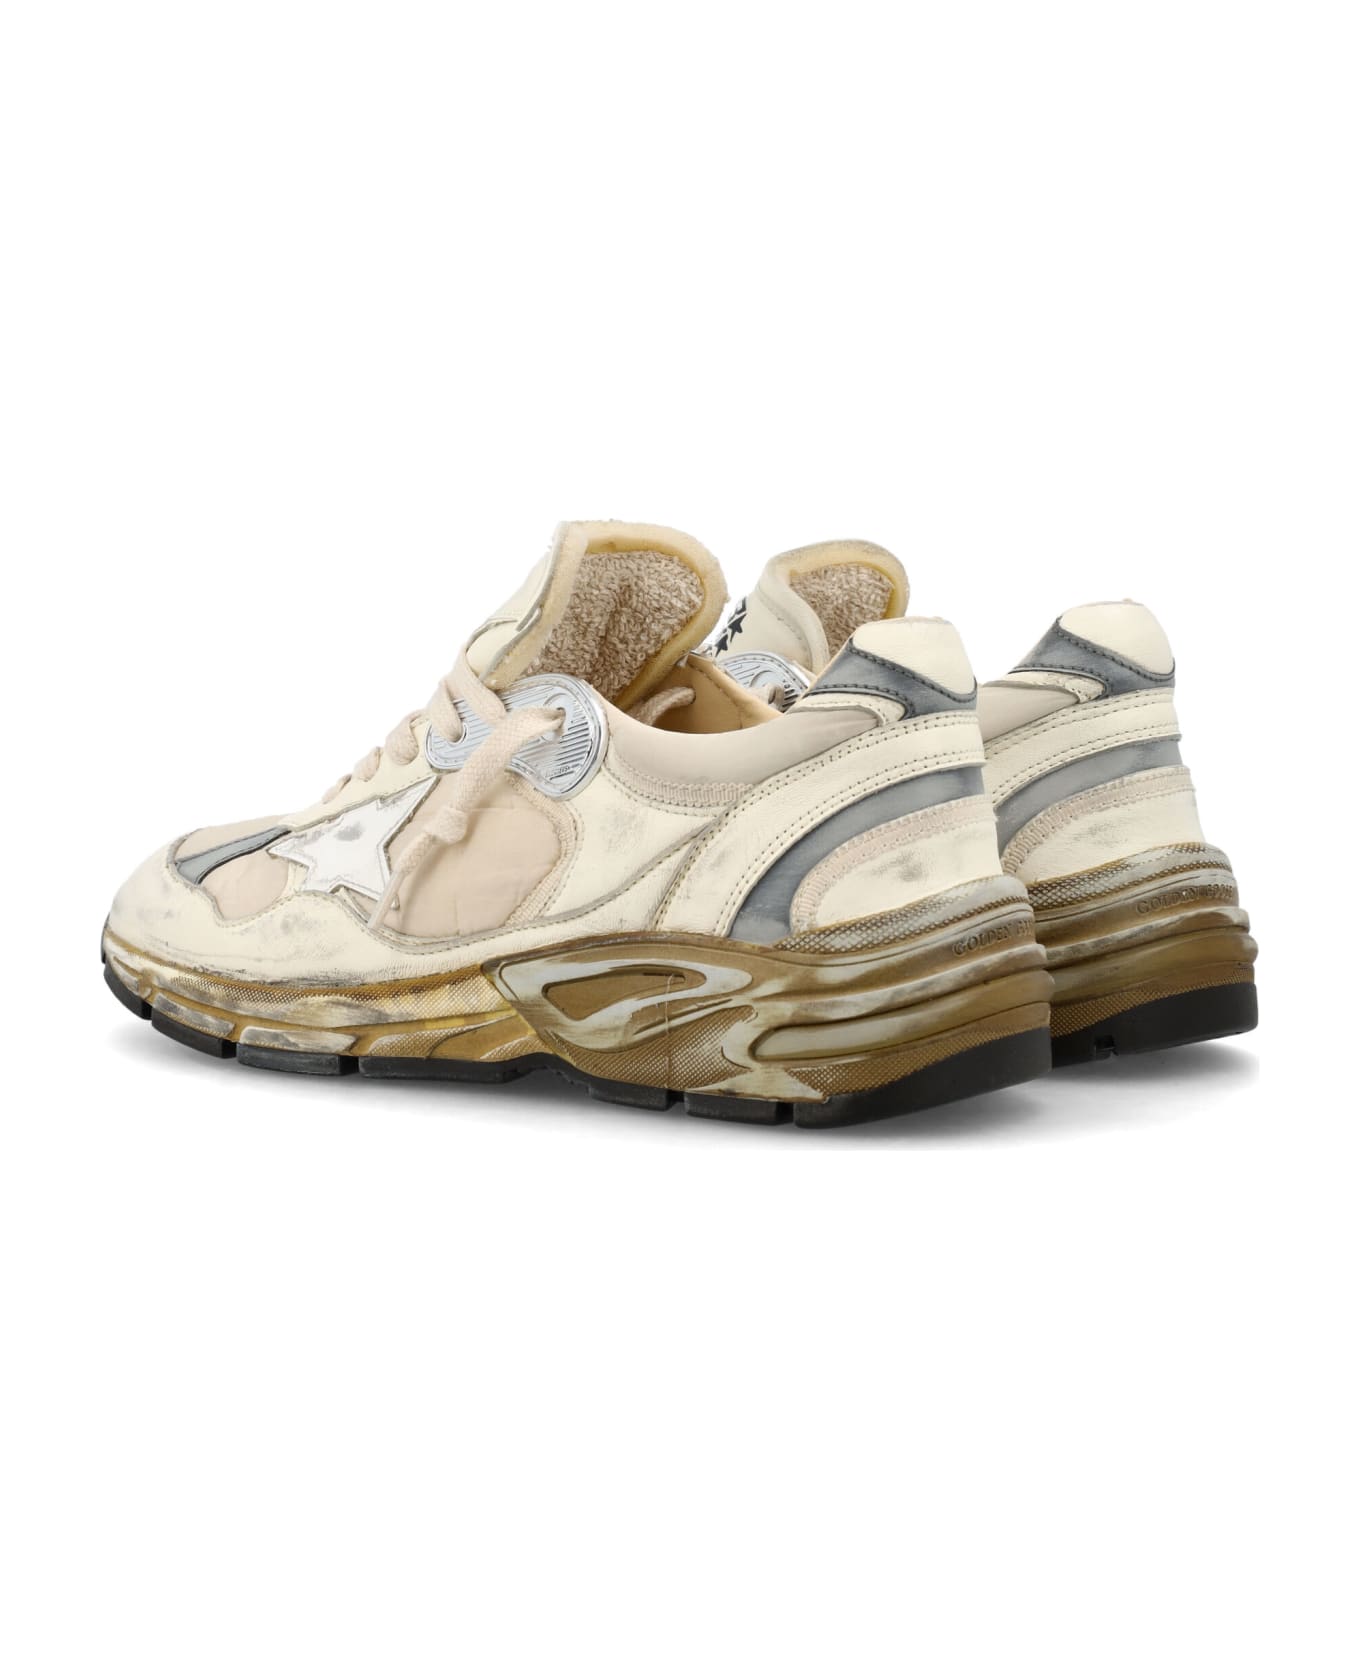 Golden Goose Running Dad Nylon And Nappa Upper With Trims Leather Star - White Beige/White Silver スニーカー